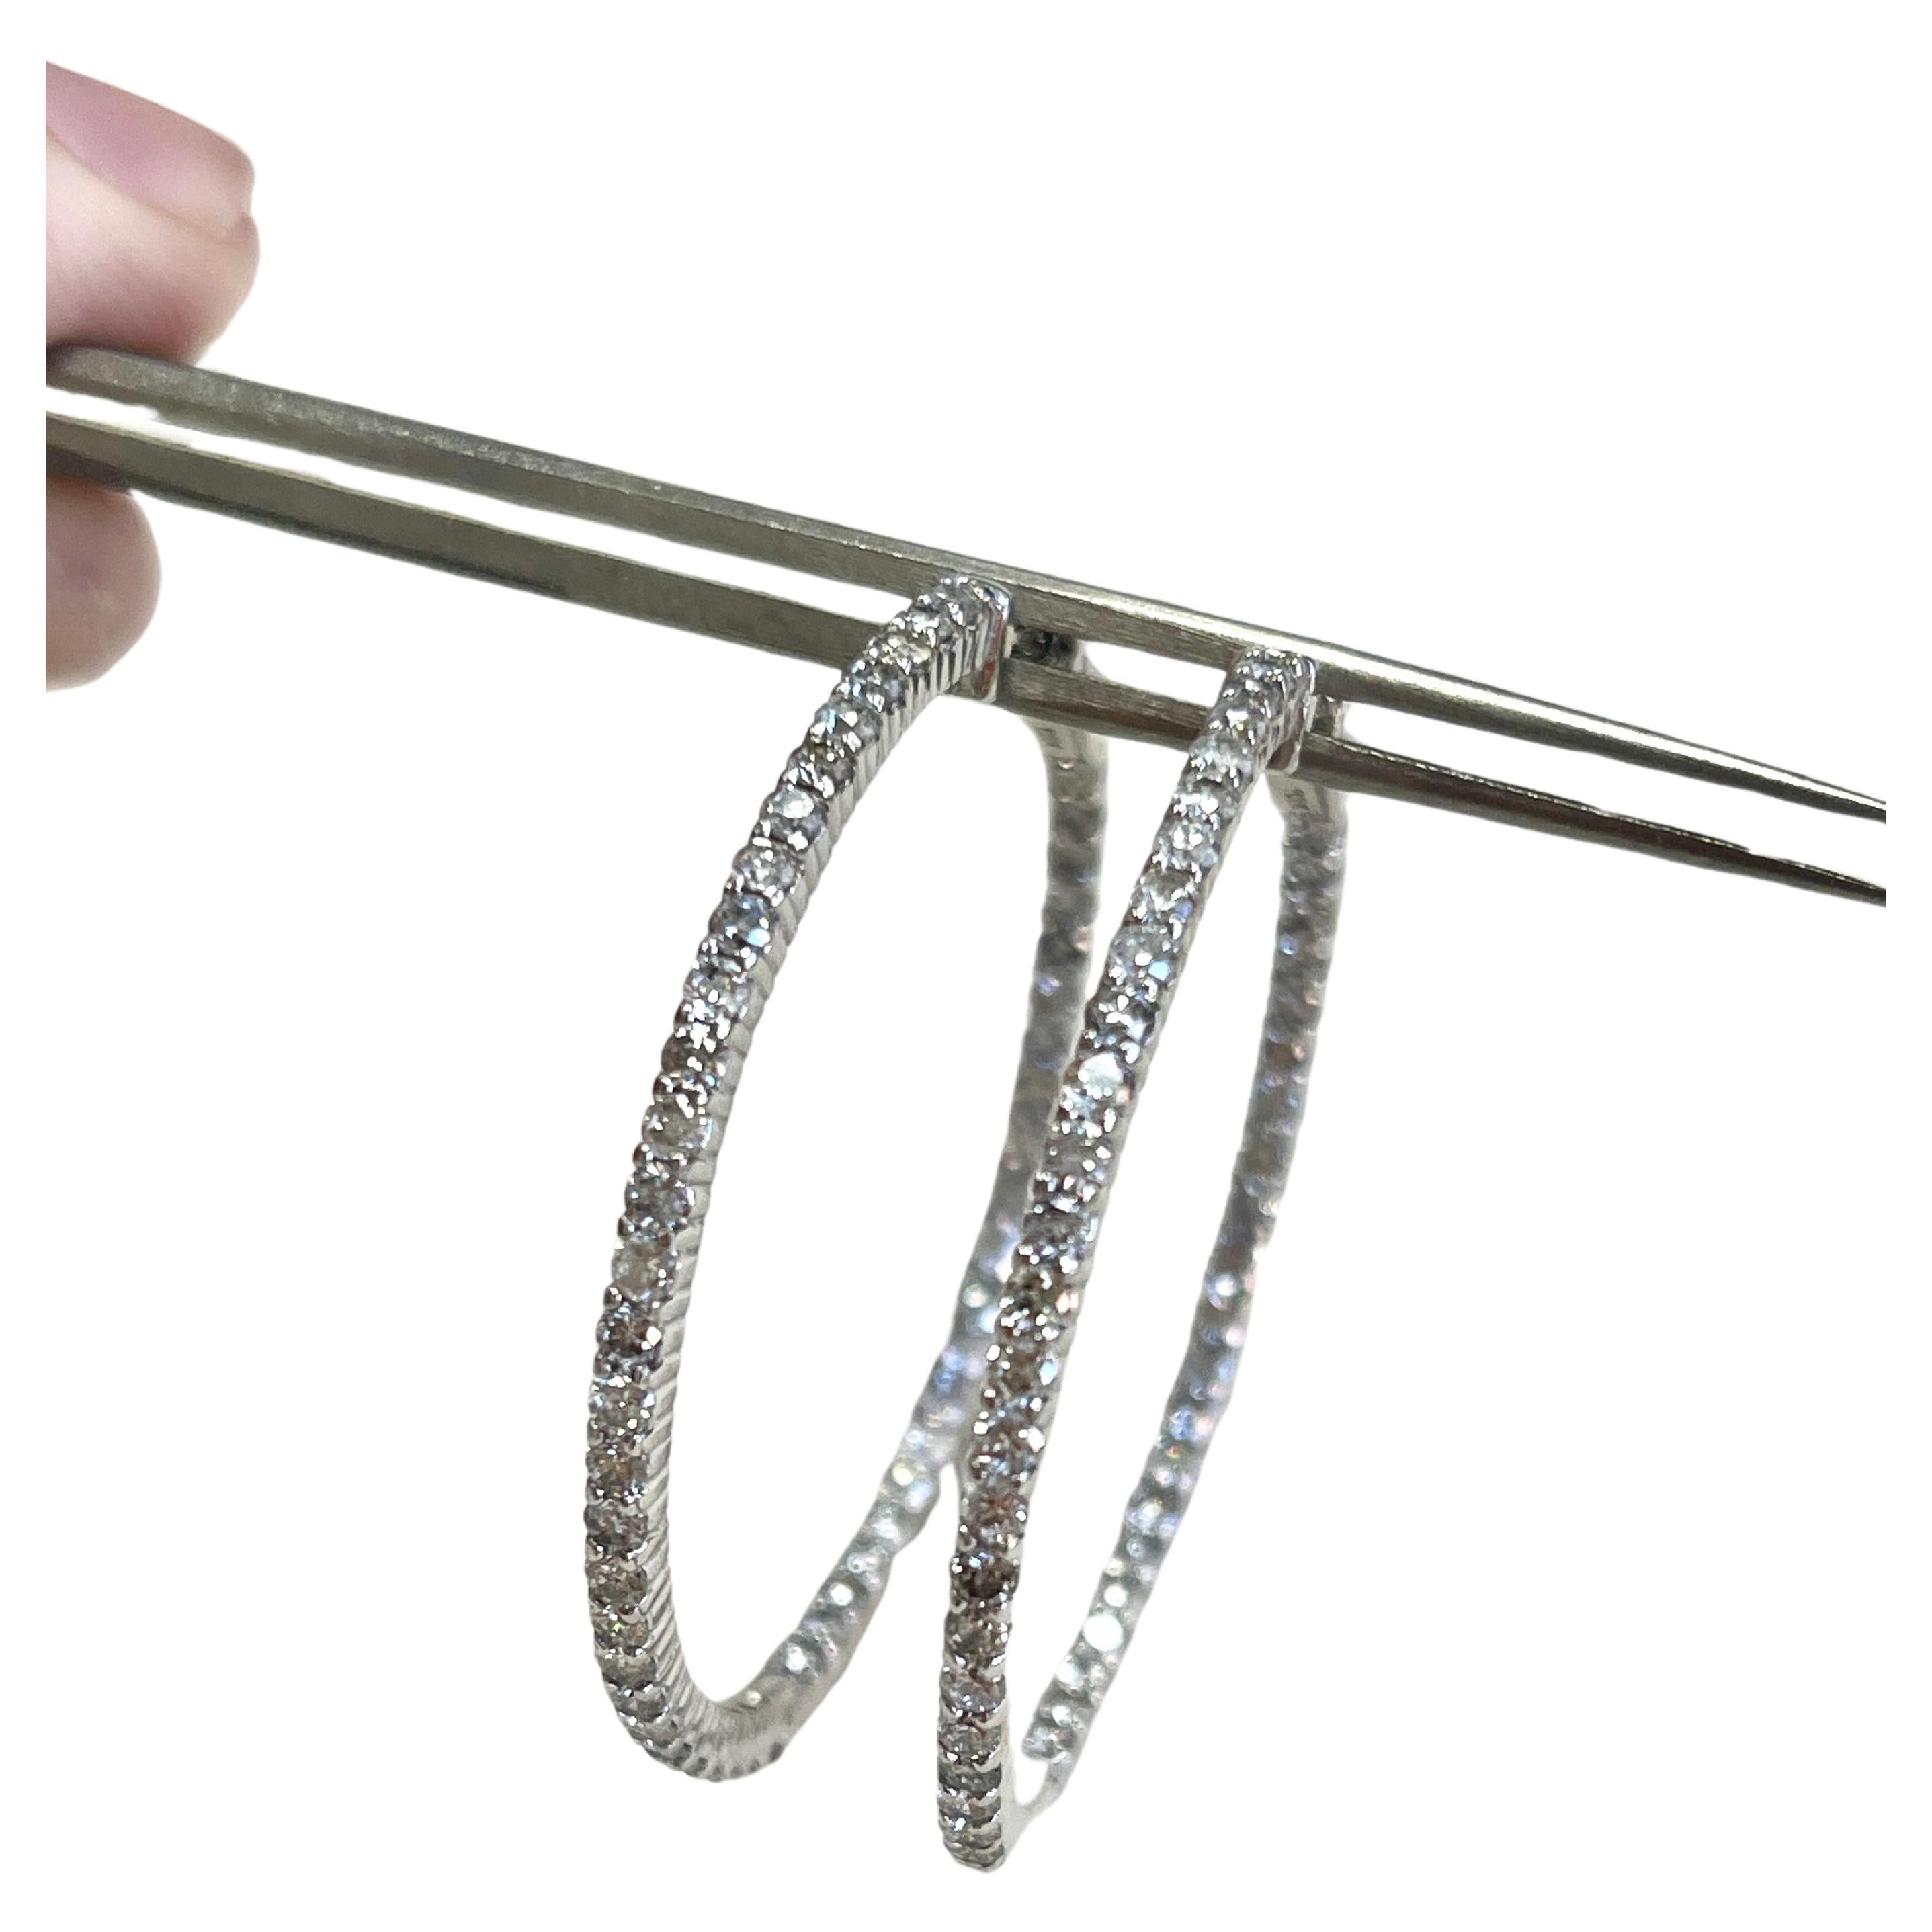 Beautiful pair of diamond hoop earrings in 14k white gold. Secures with snap closure for wear. Elegance for every moment. Inside out style 100 pieces Natural Diamonds
Average Color F, Clarity  I 
Measures 1.70 inch diameter.  10.94 grams

*Free